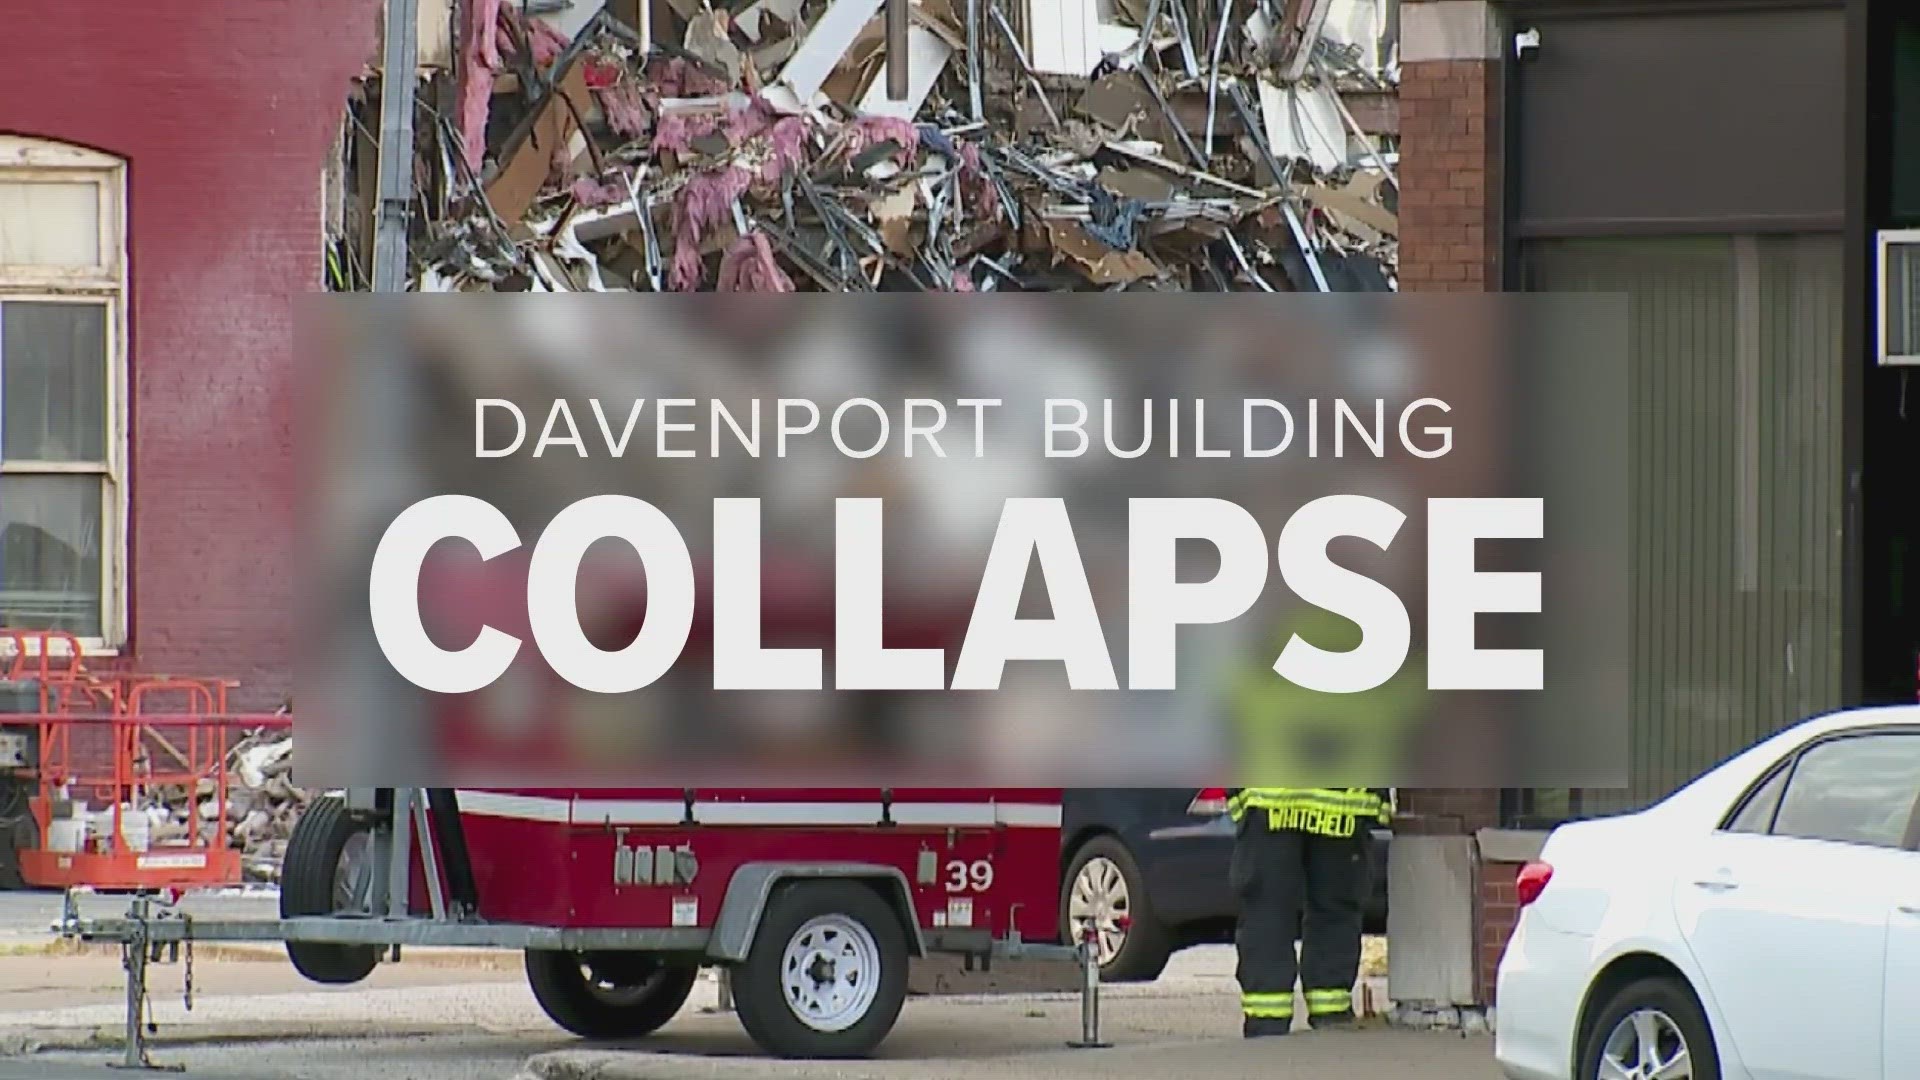 Gov. Kim Reynolds announced Friday that the U.S. Small Business Administration will provide assistance to victims of the Davenport collapse.